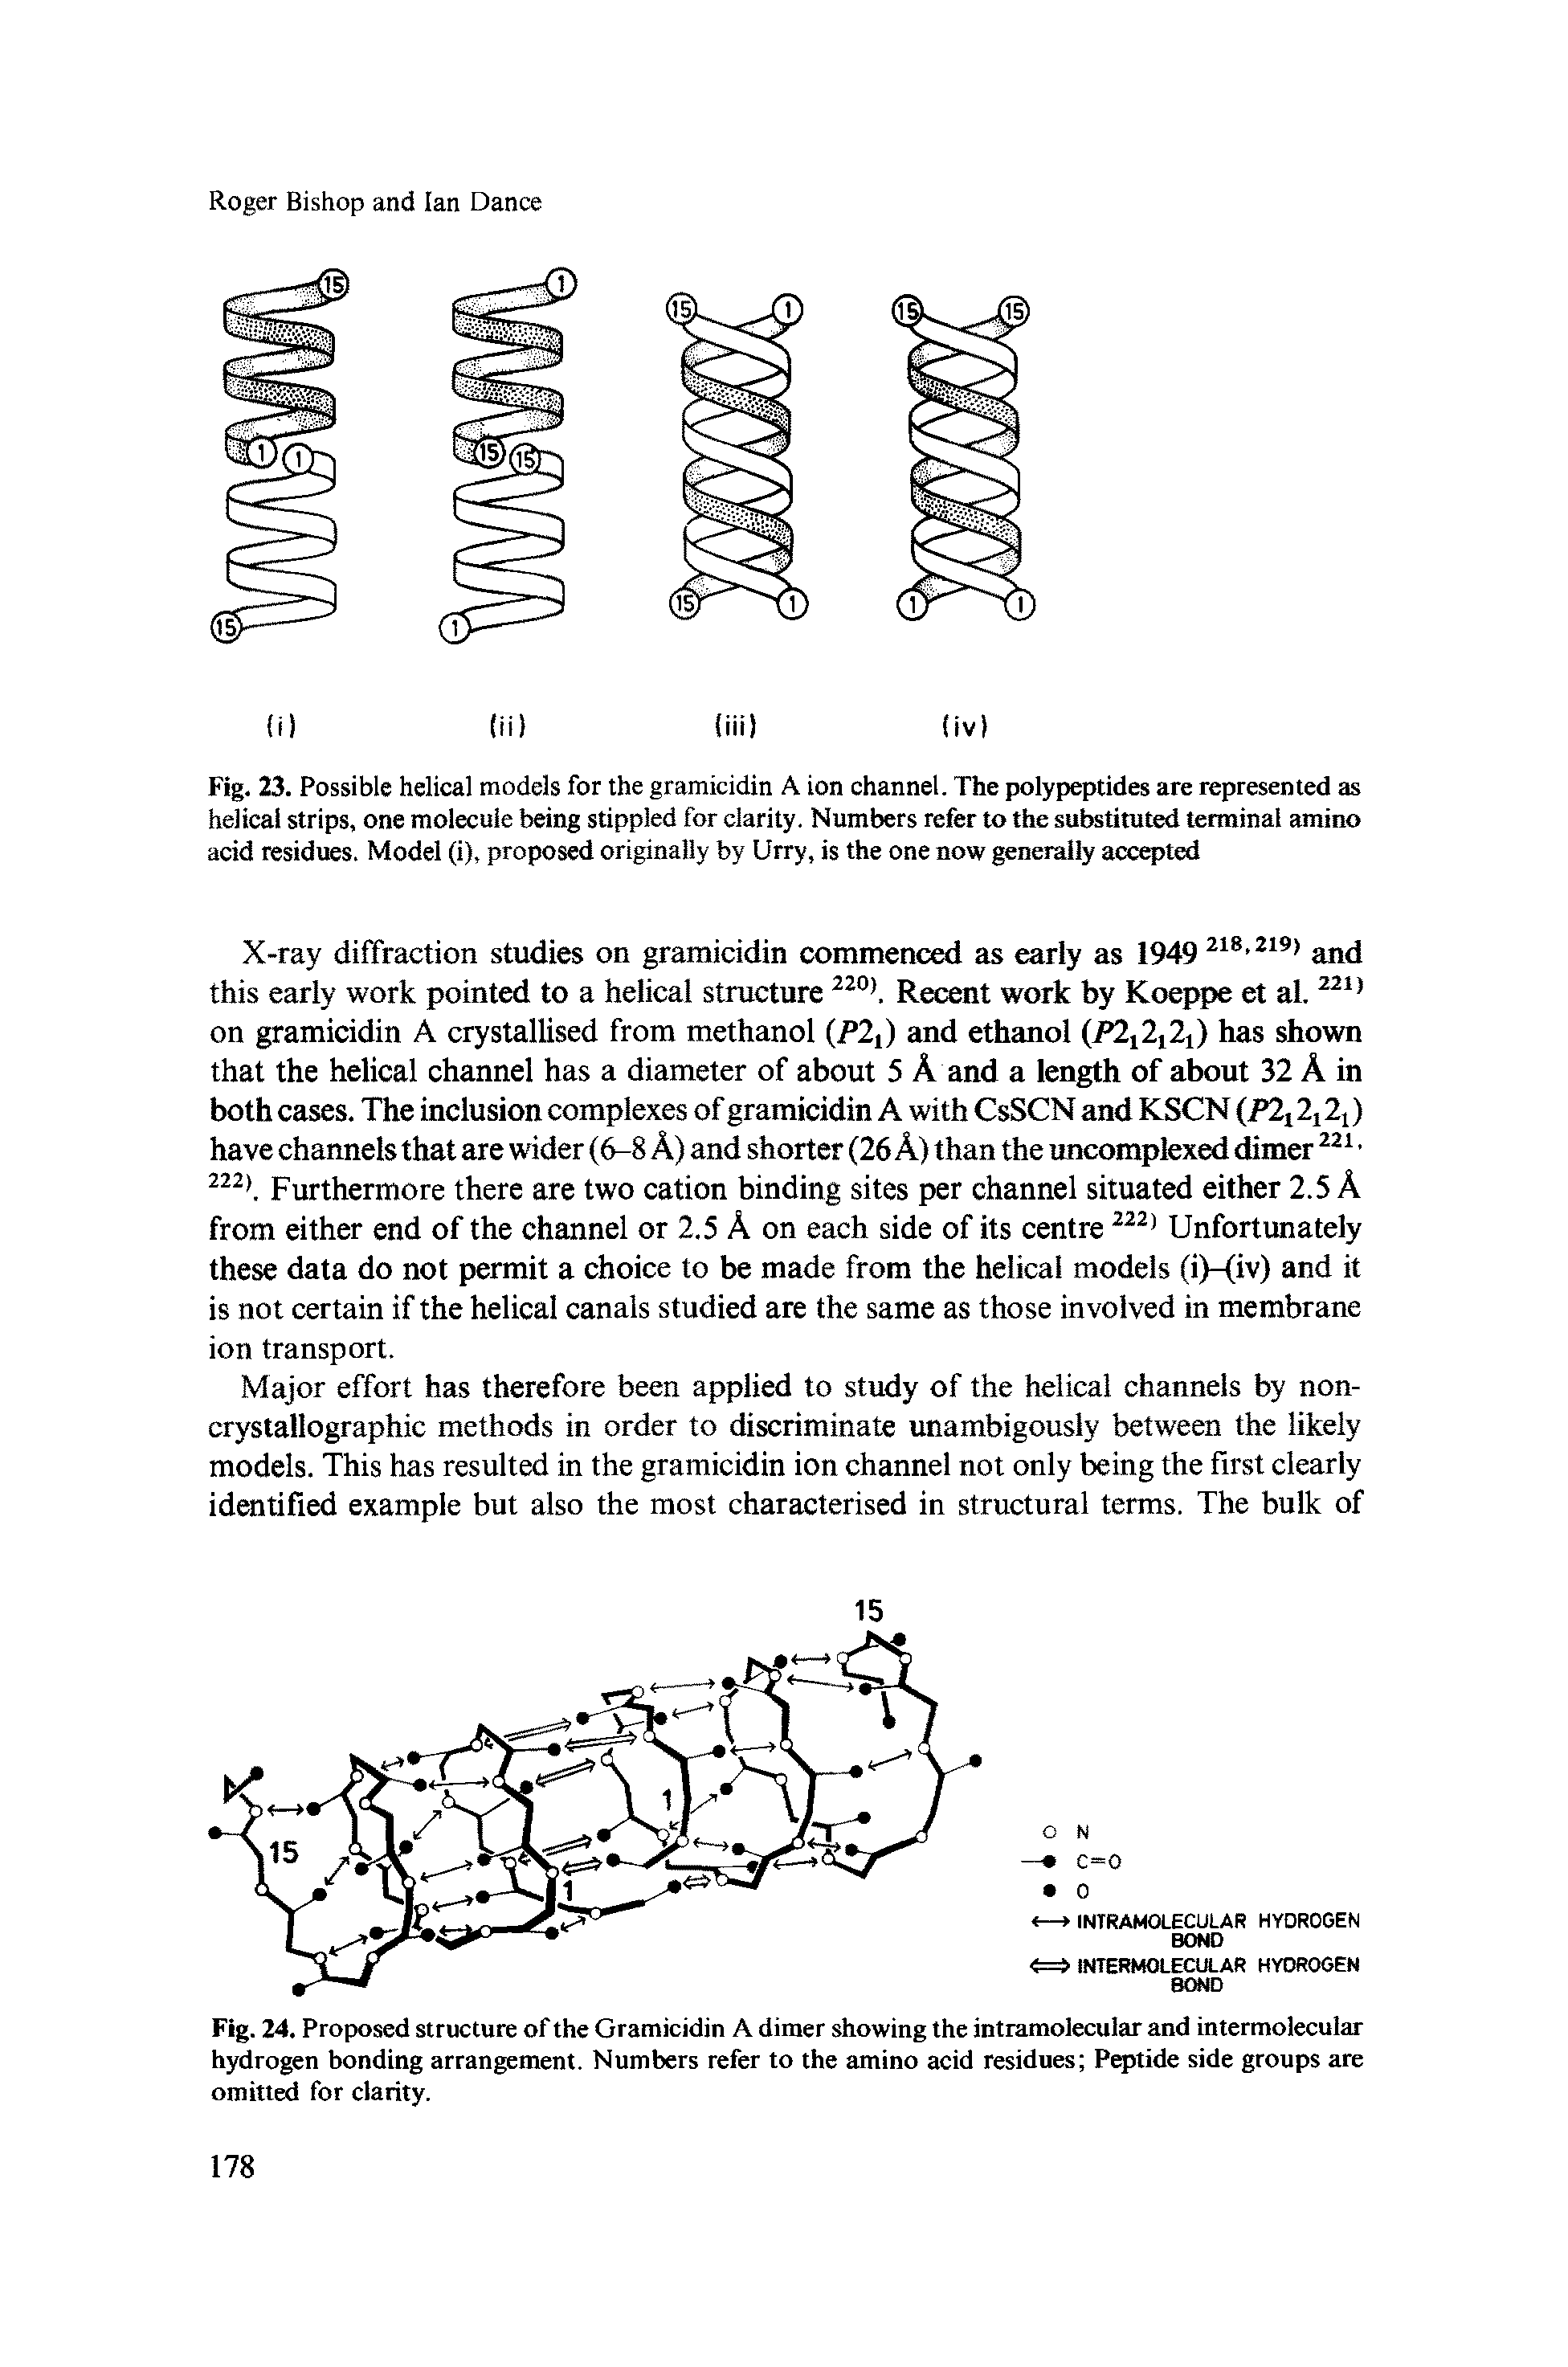 Fig. 23. Possible helical models for the gramicidin A ion channel. The polypeptides are represented as helical strips, one molecule being stippled for clarity. Numbers refer to the substituted terminal amino acid residues. Model (i), proposed originally by Urry, is the one now generally accepted...